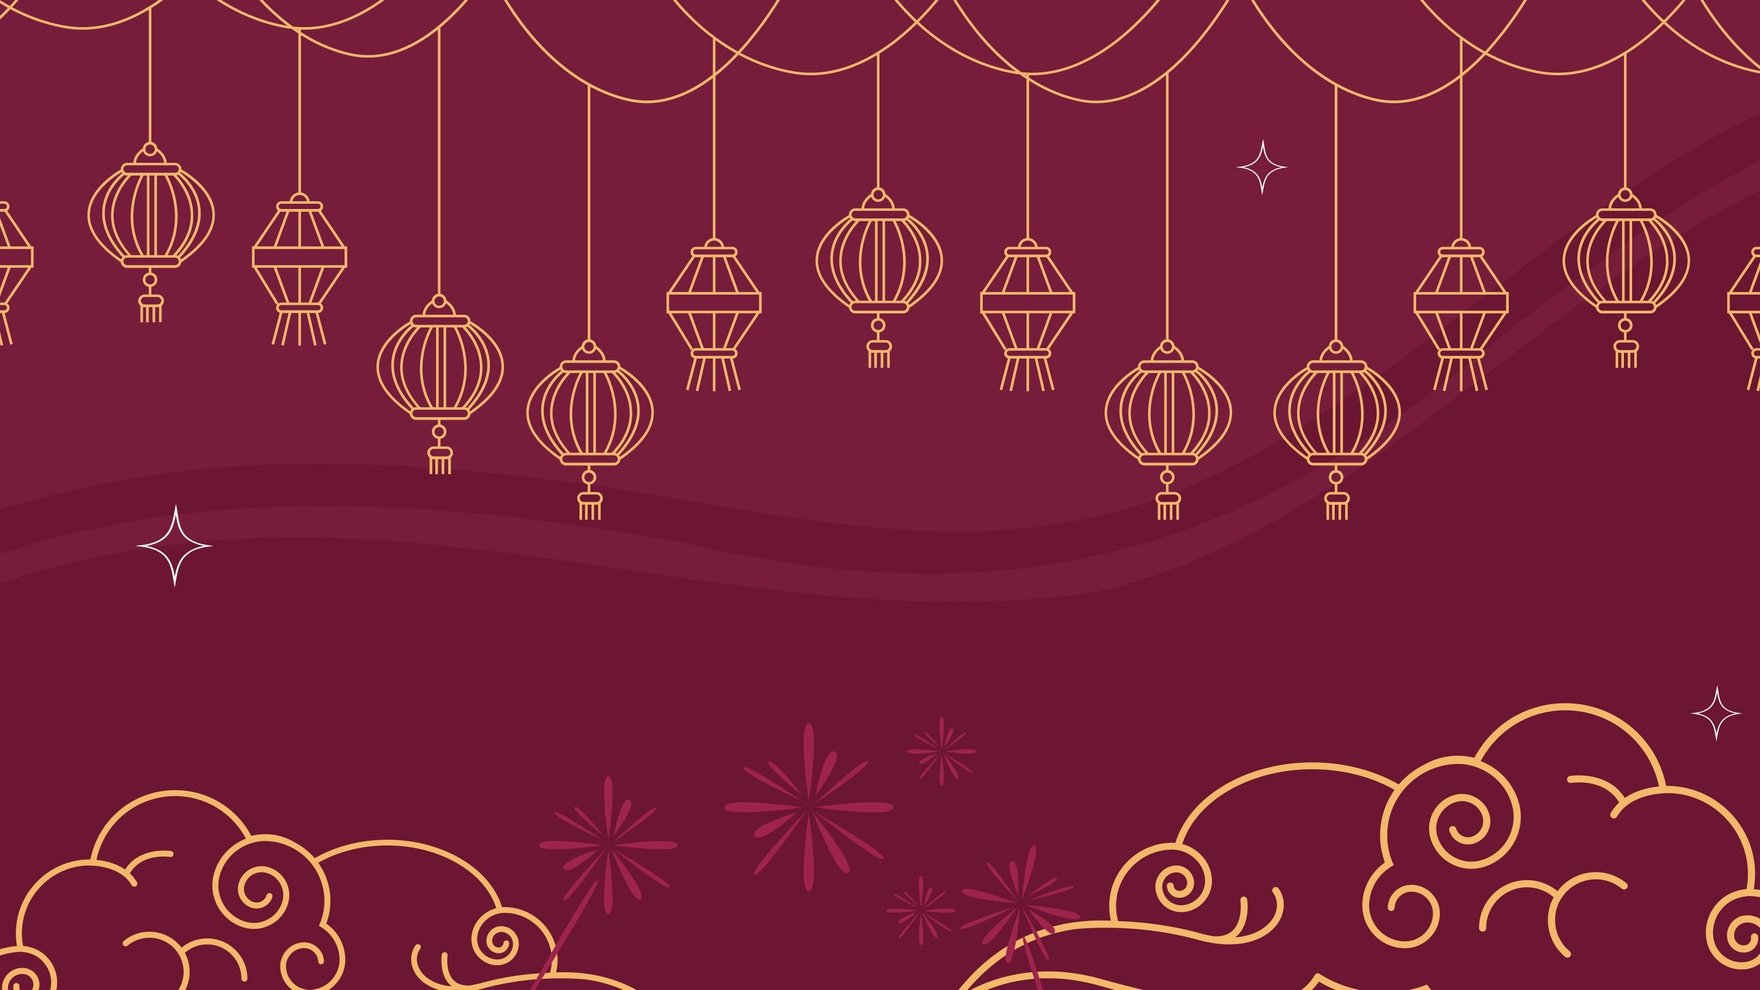 Fire flame background design Royalty Free Vector Image